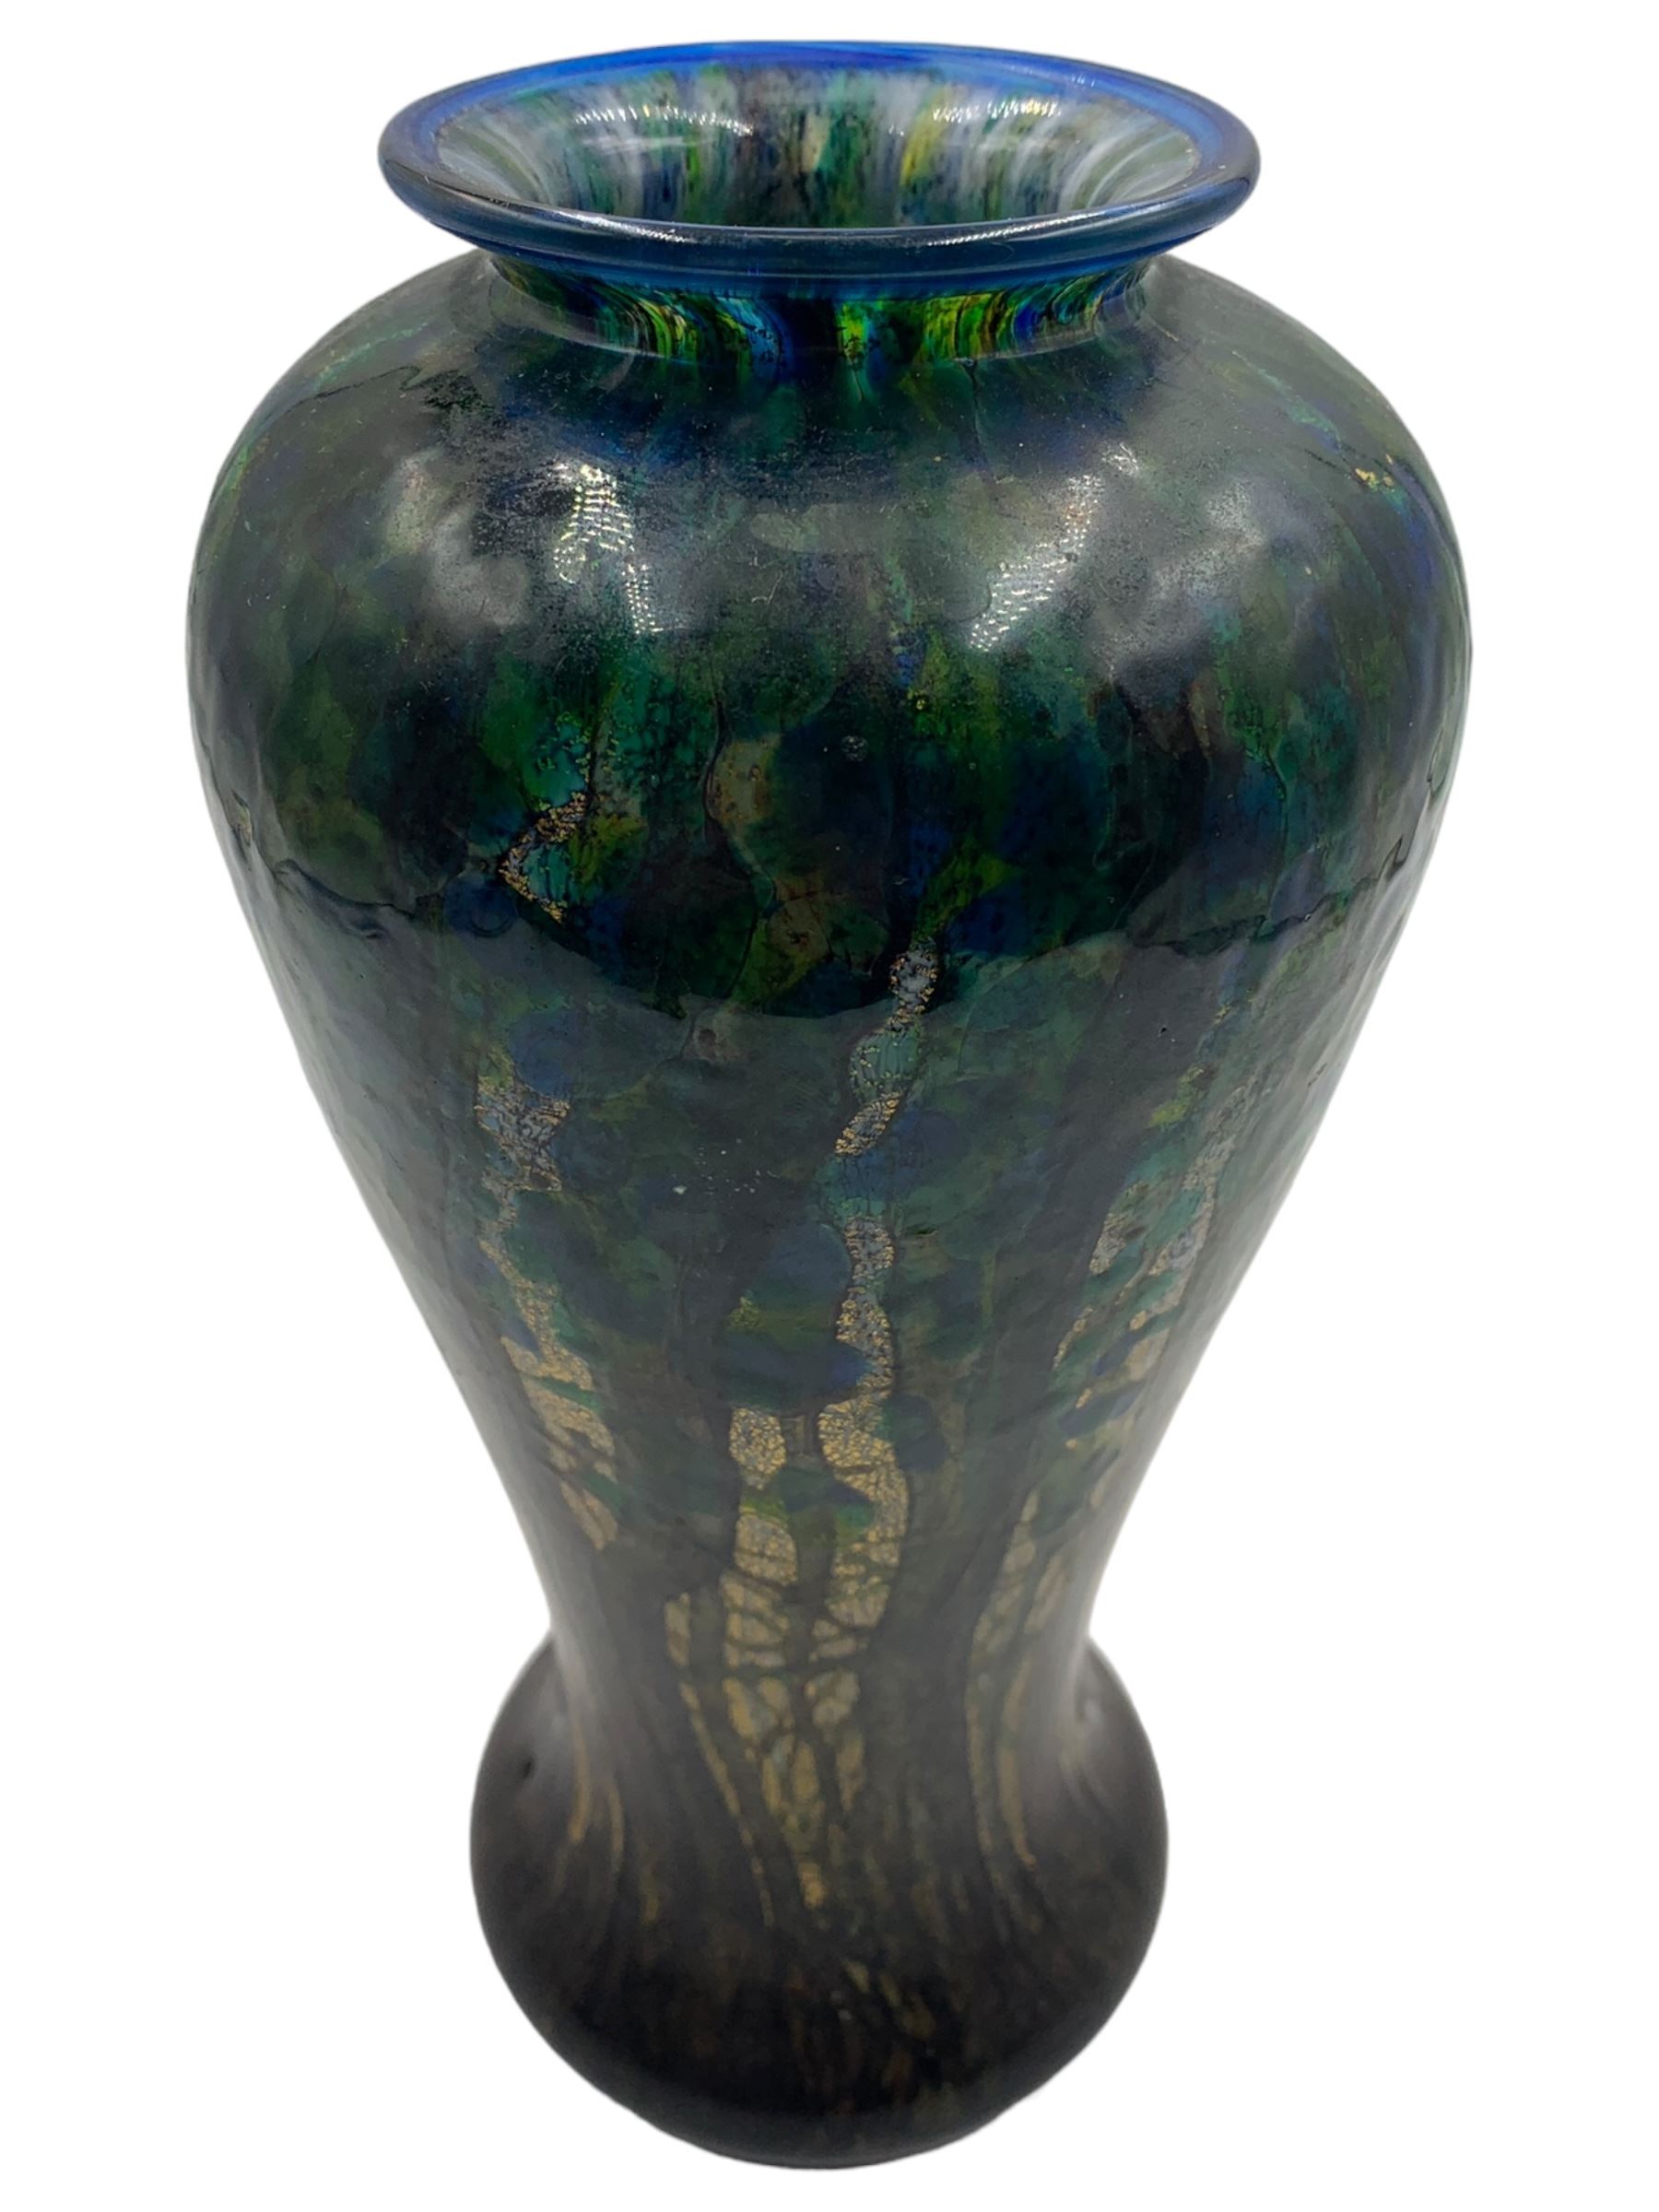 Isle of Wight glass vase by Timothy Harris - Image 2 of 5